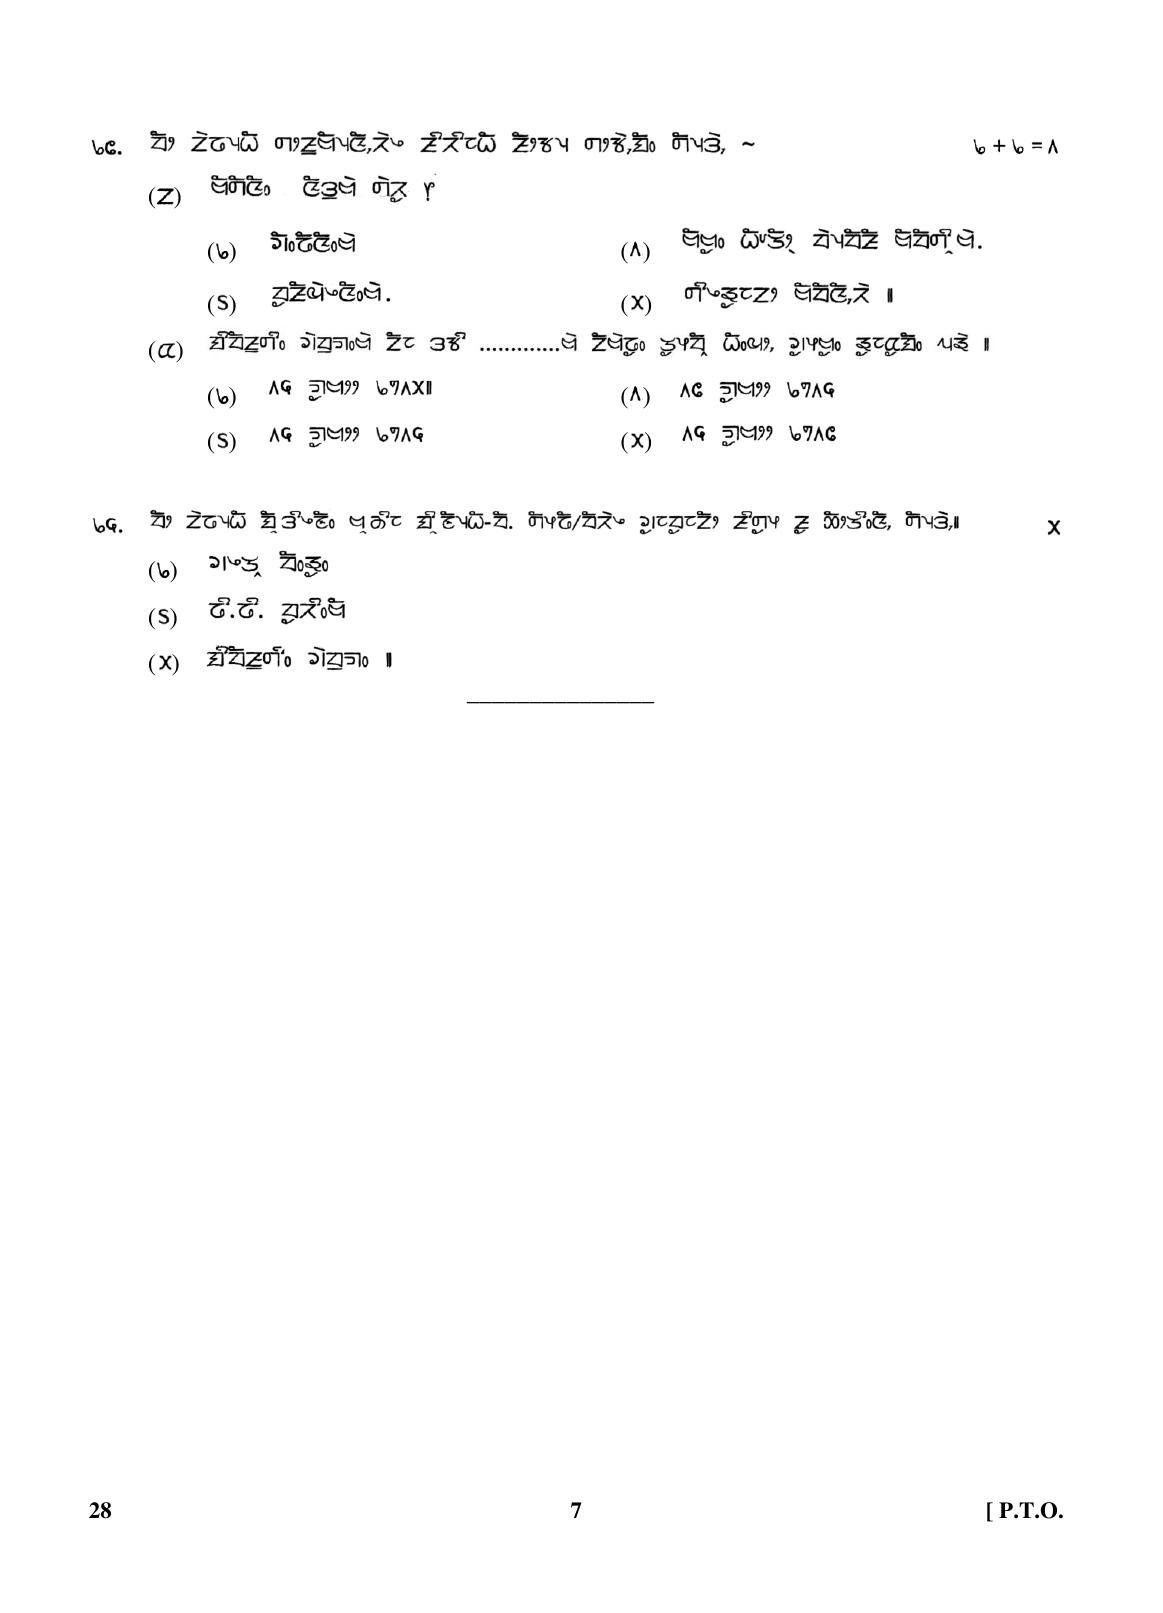 CBSE Class 10 28 (Limboo) 2018 Question Paper - Page 7